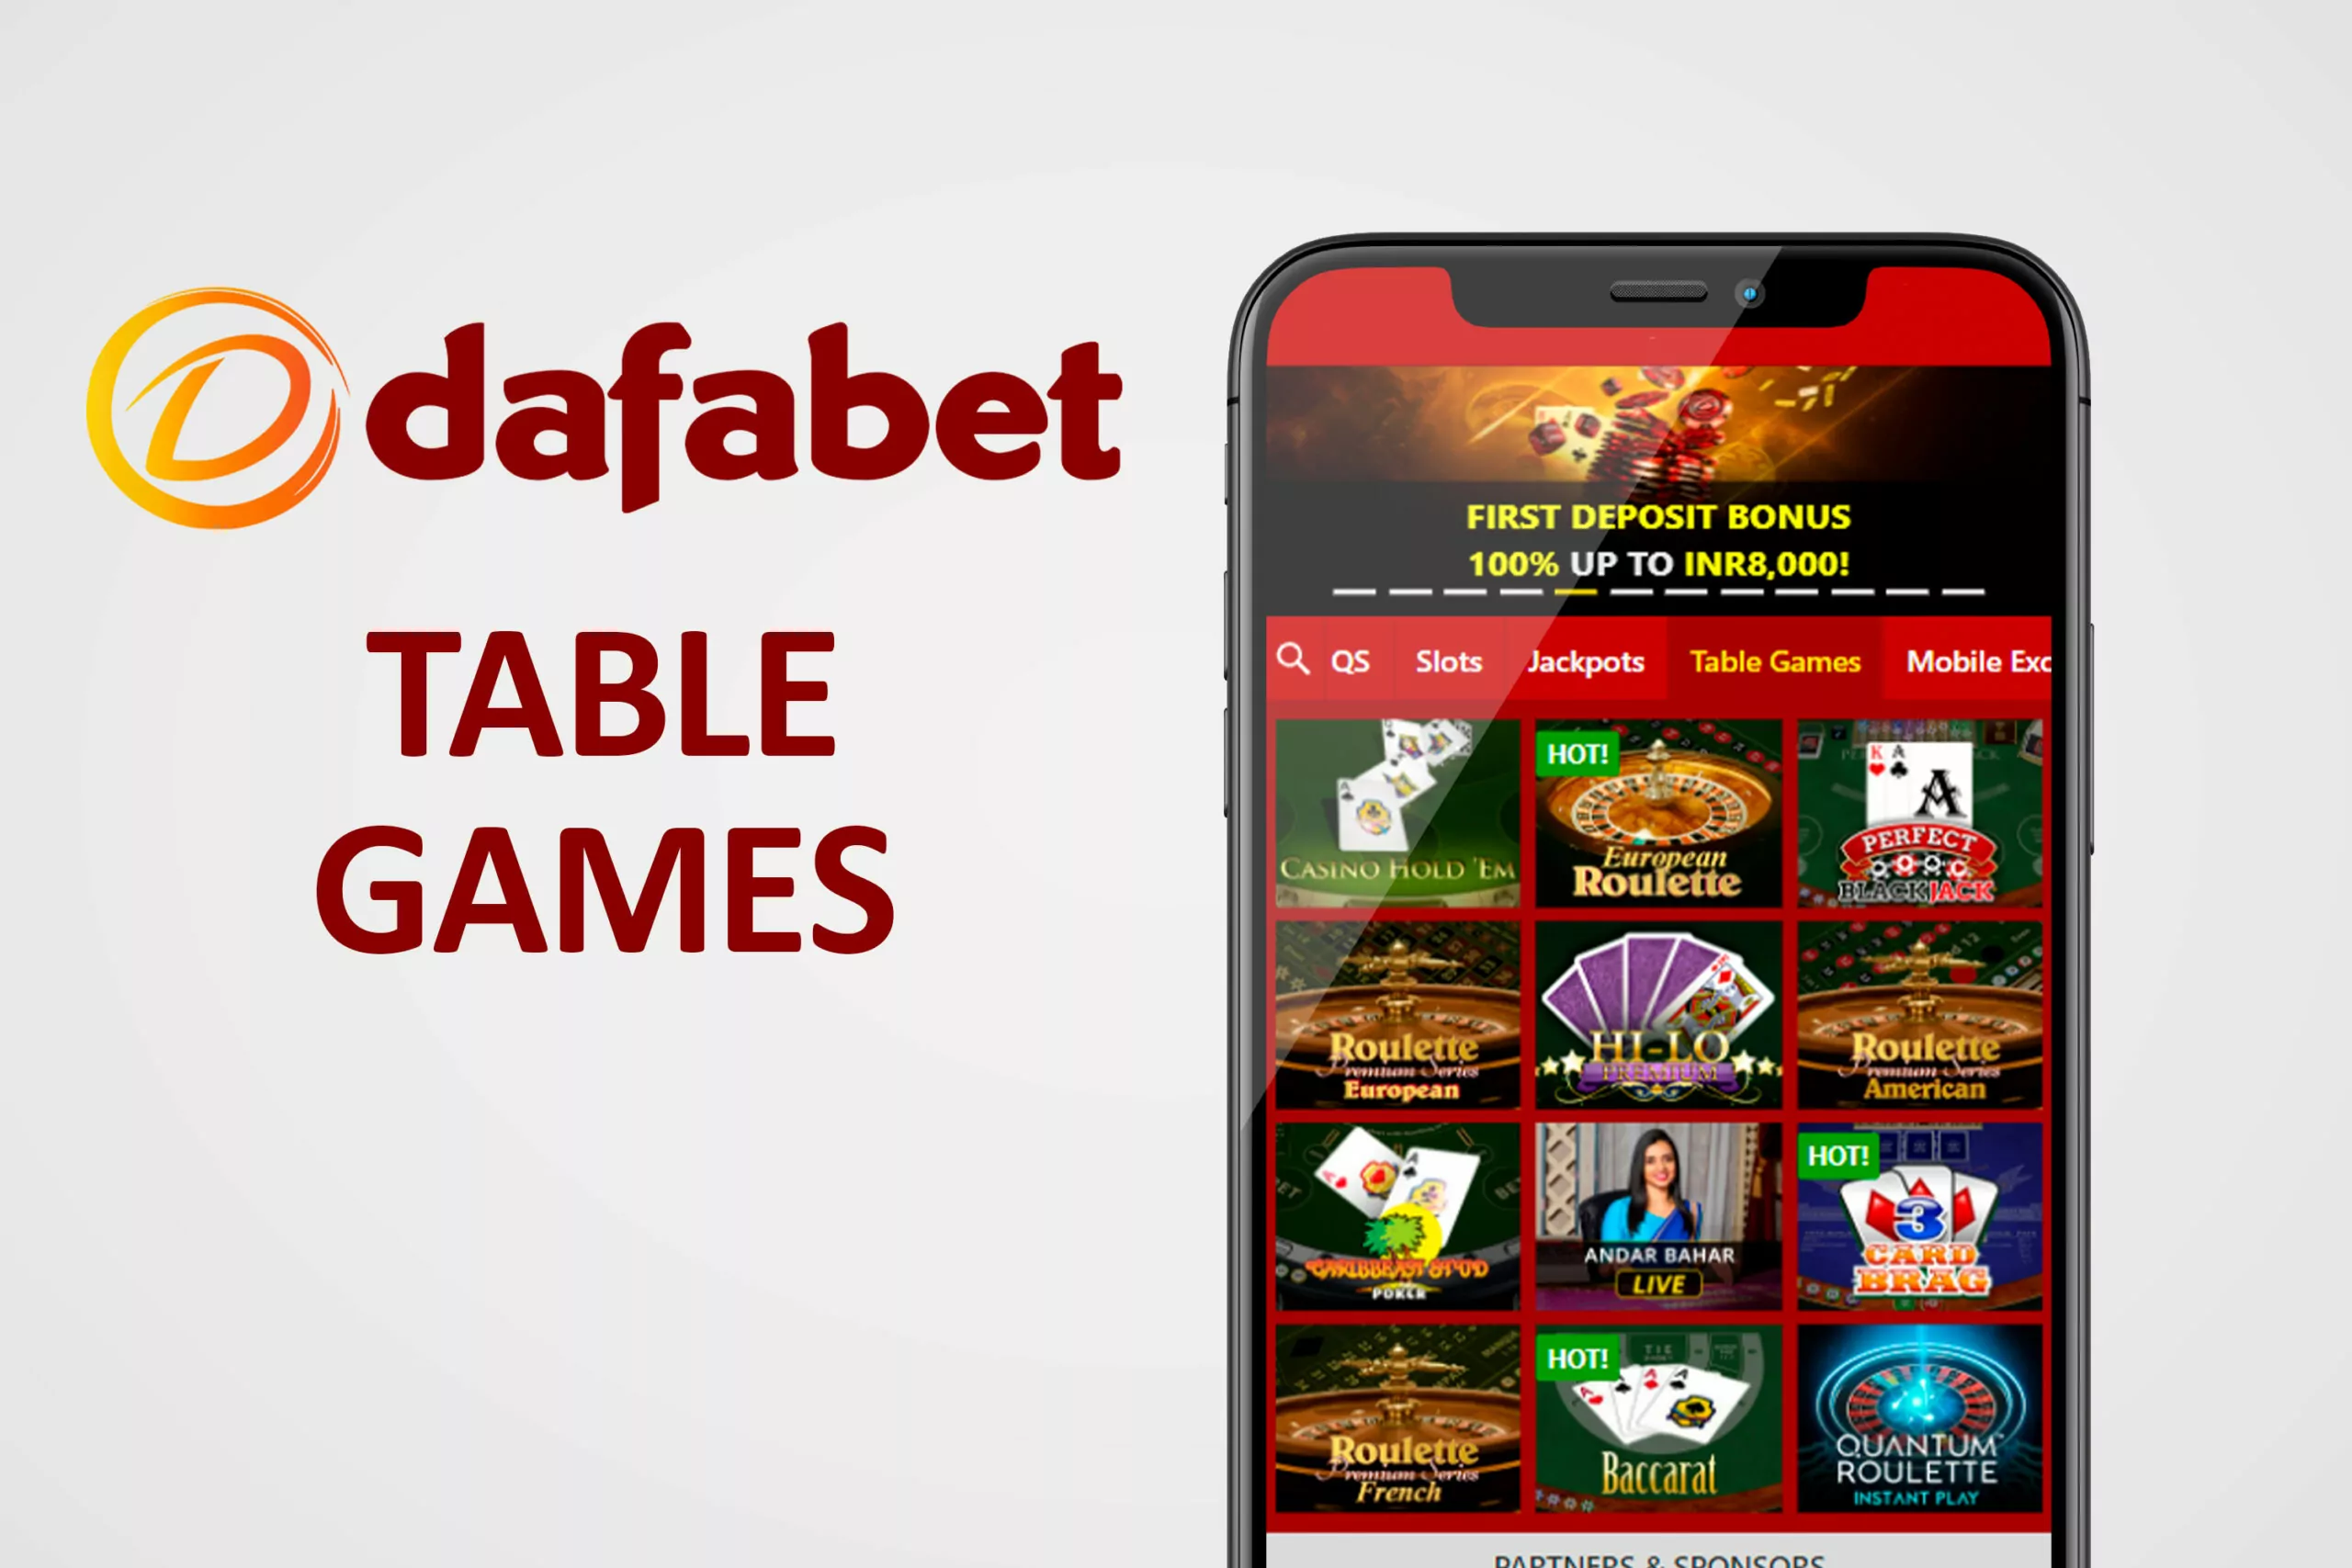 Play you favorite board games via the mobile phone.